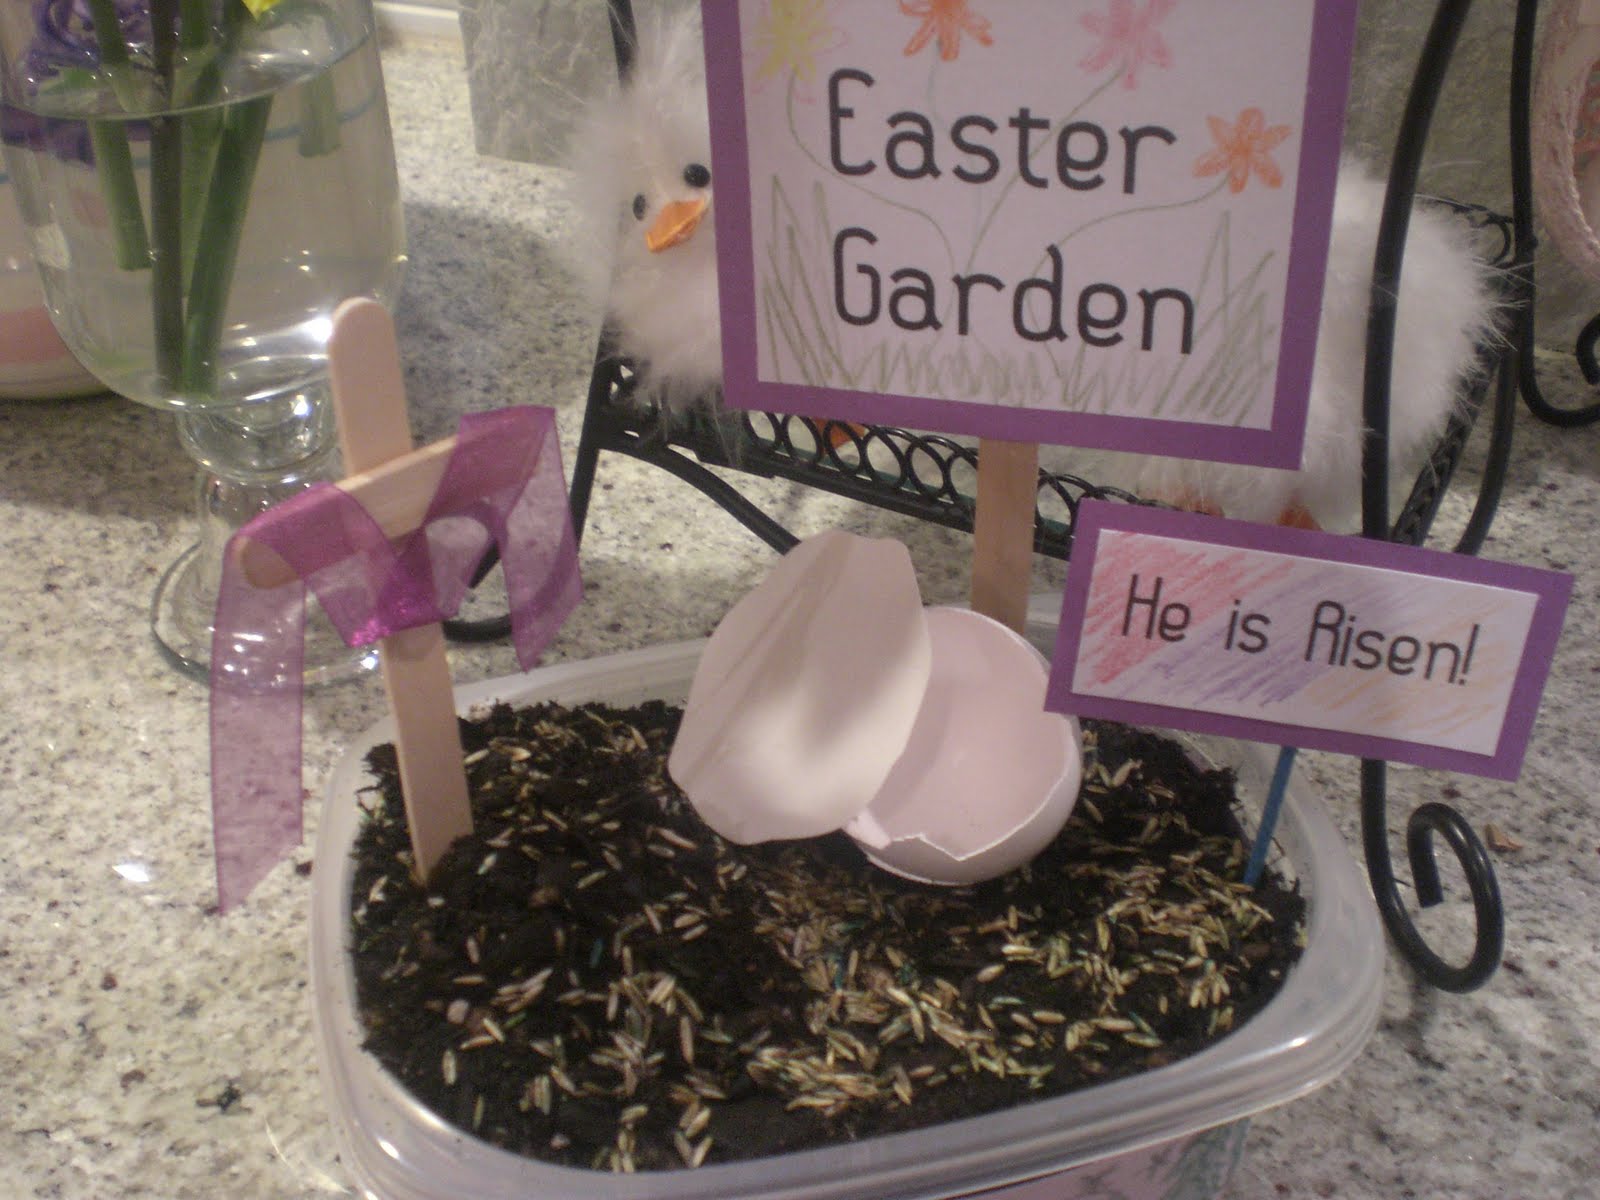 michelle paige blogs: Sunday School Easter Craft